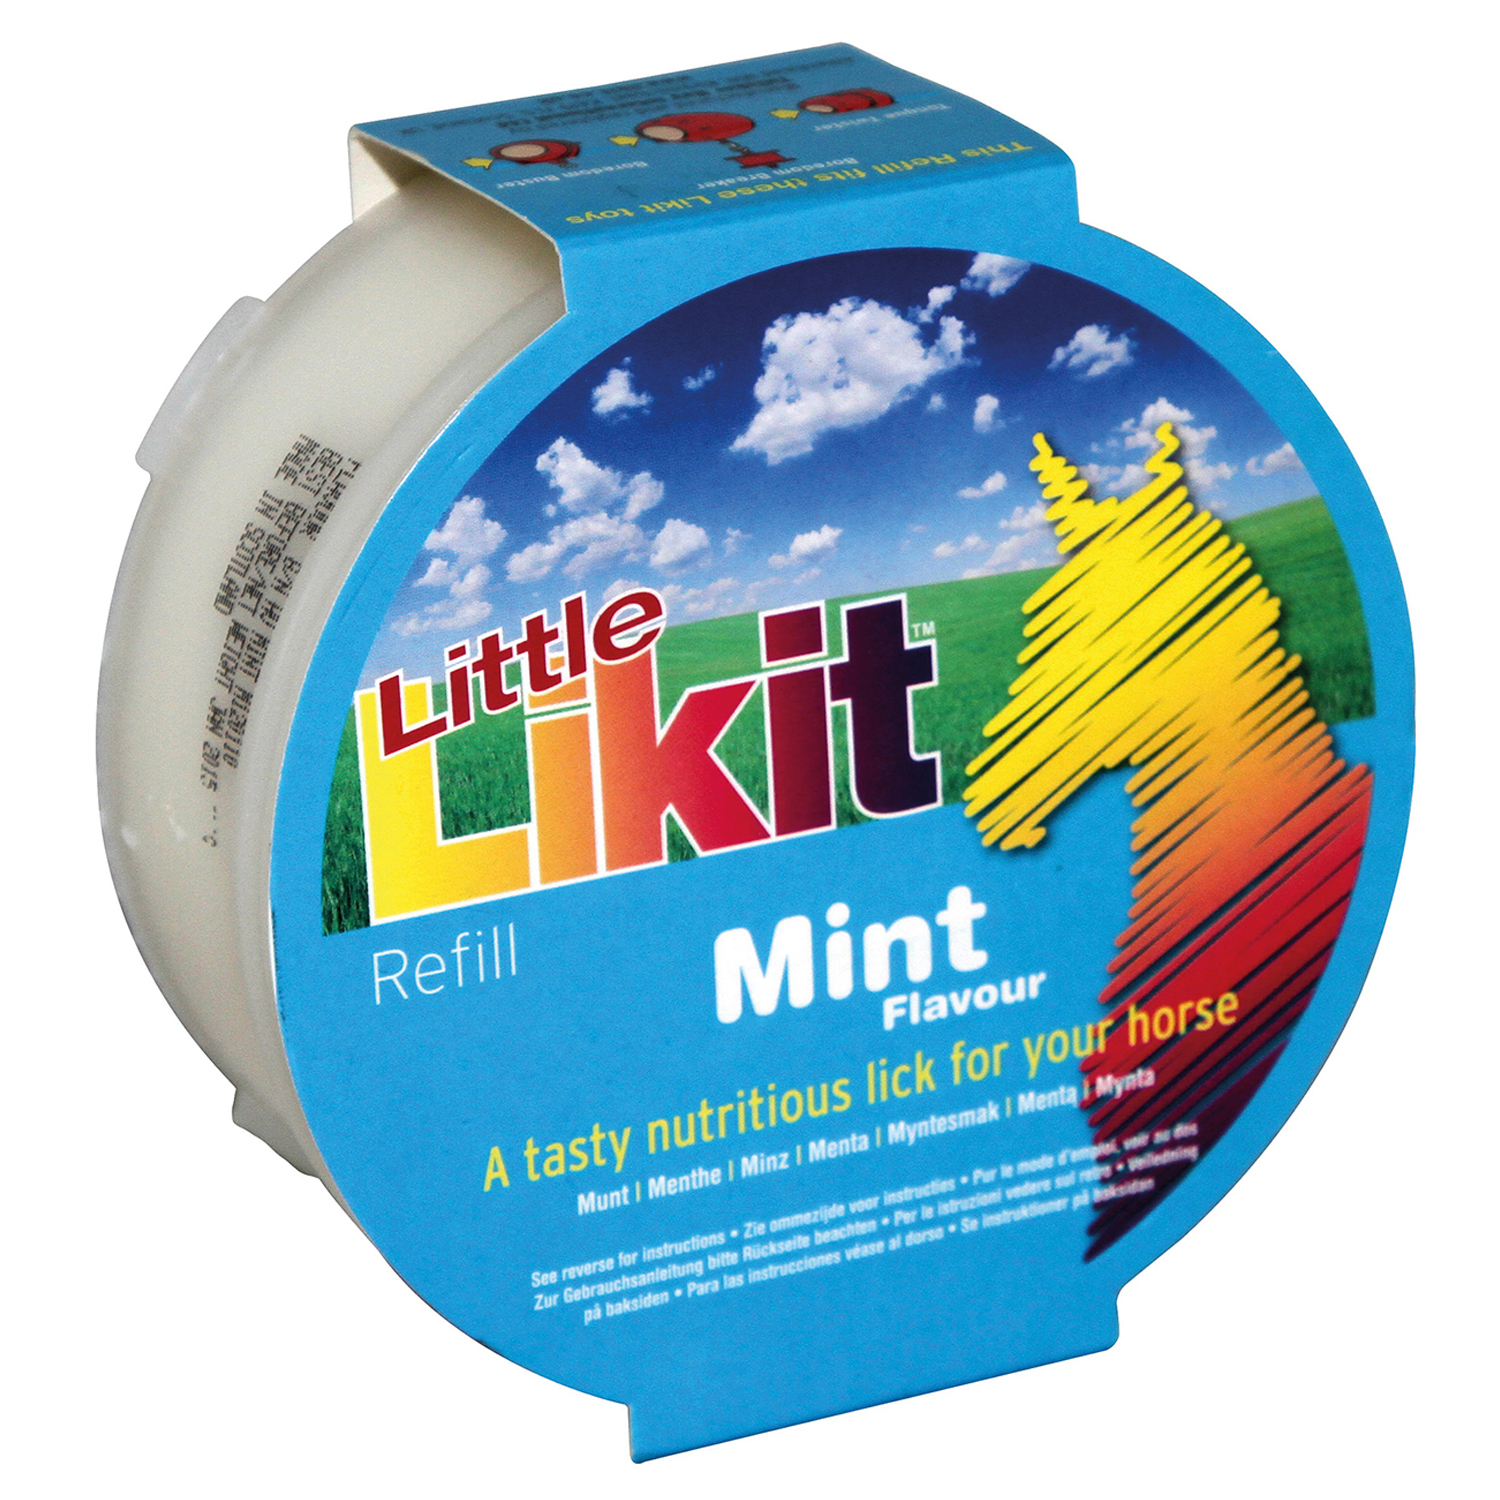 LITTLE LIKIT 24 PACK MINT X 24 PACK 24 PACK MINT